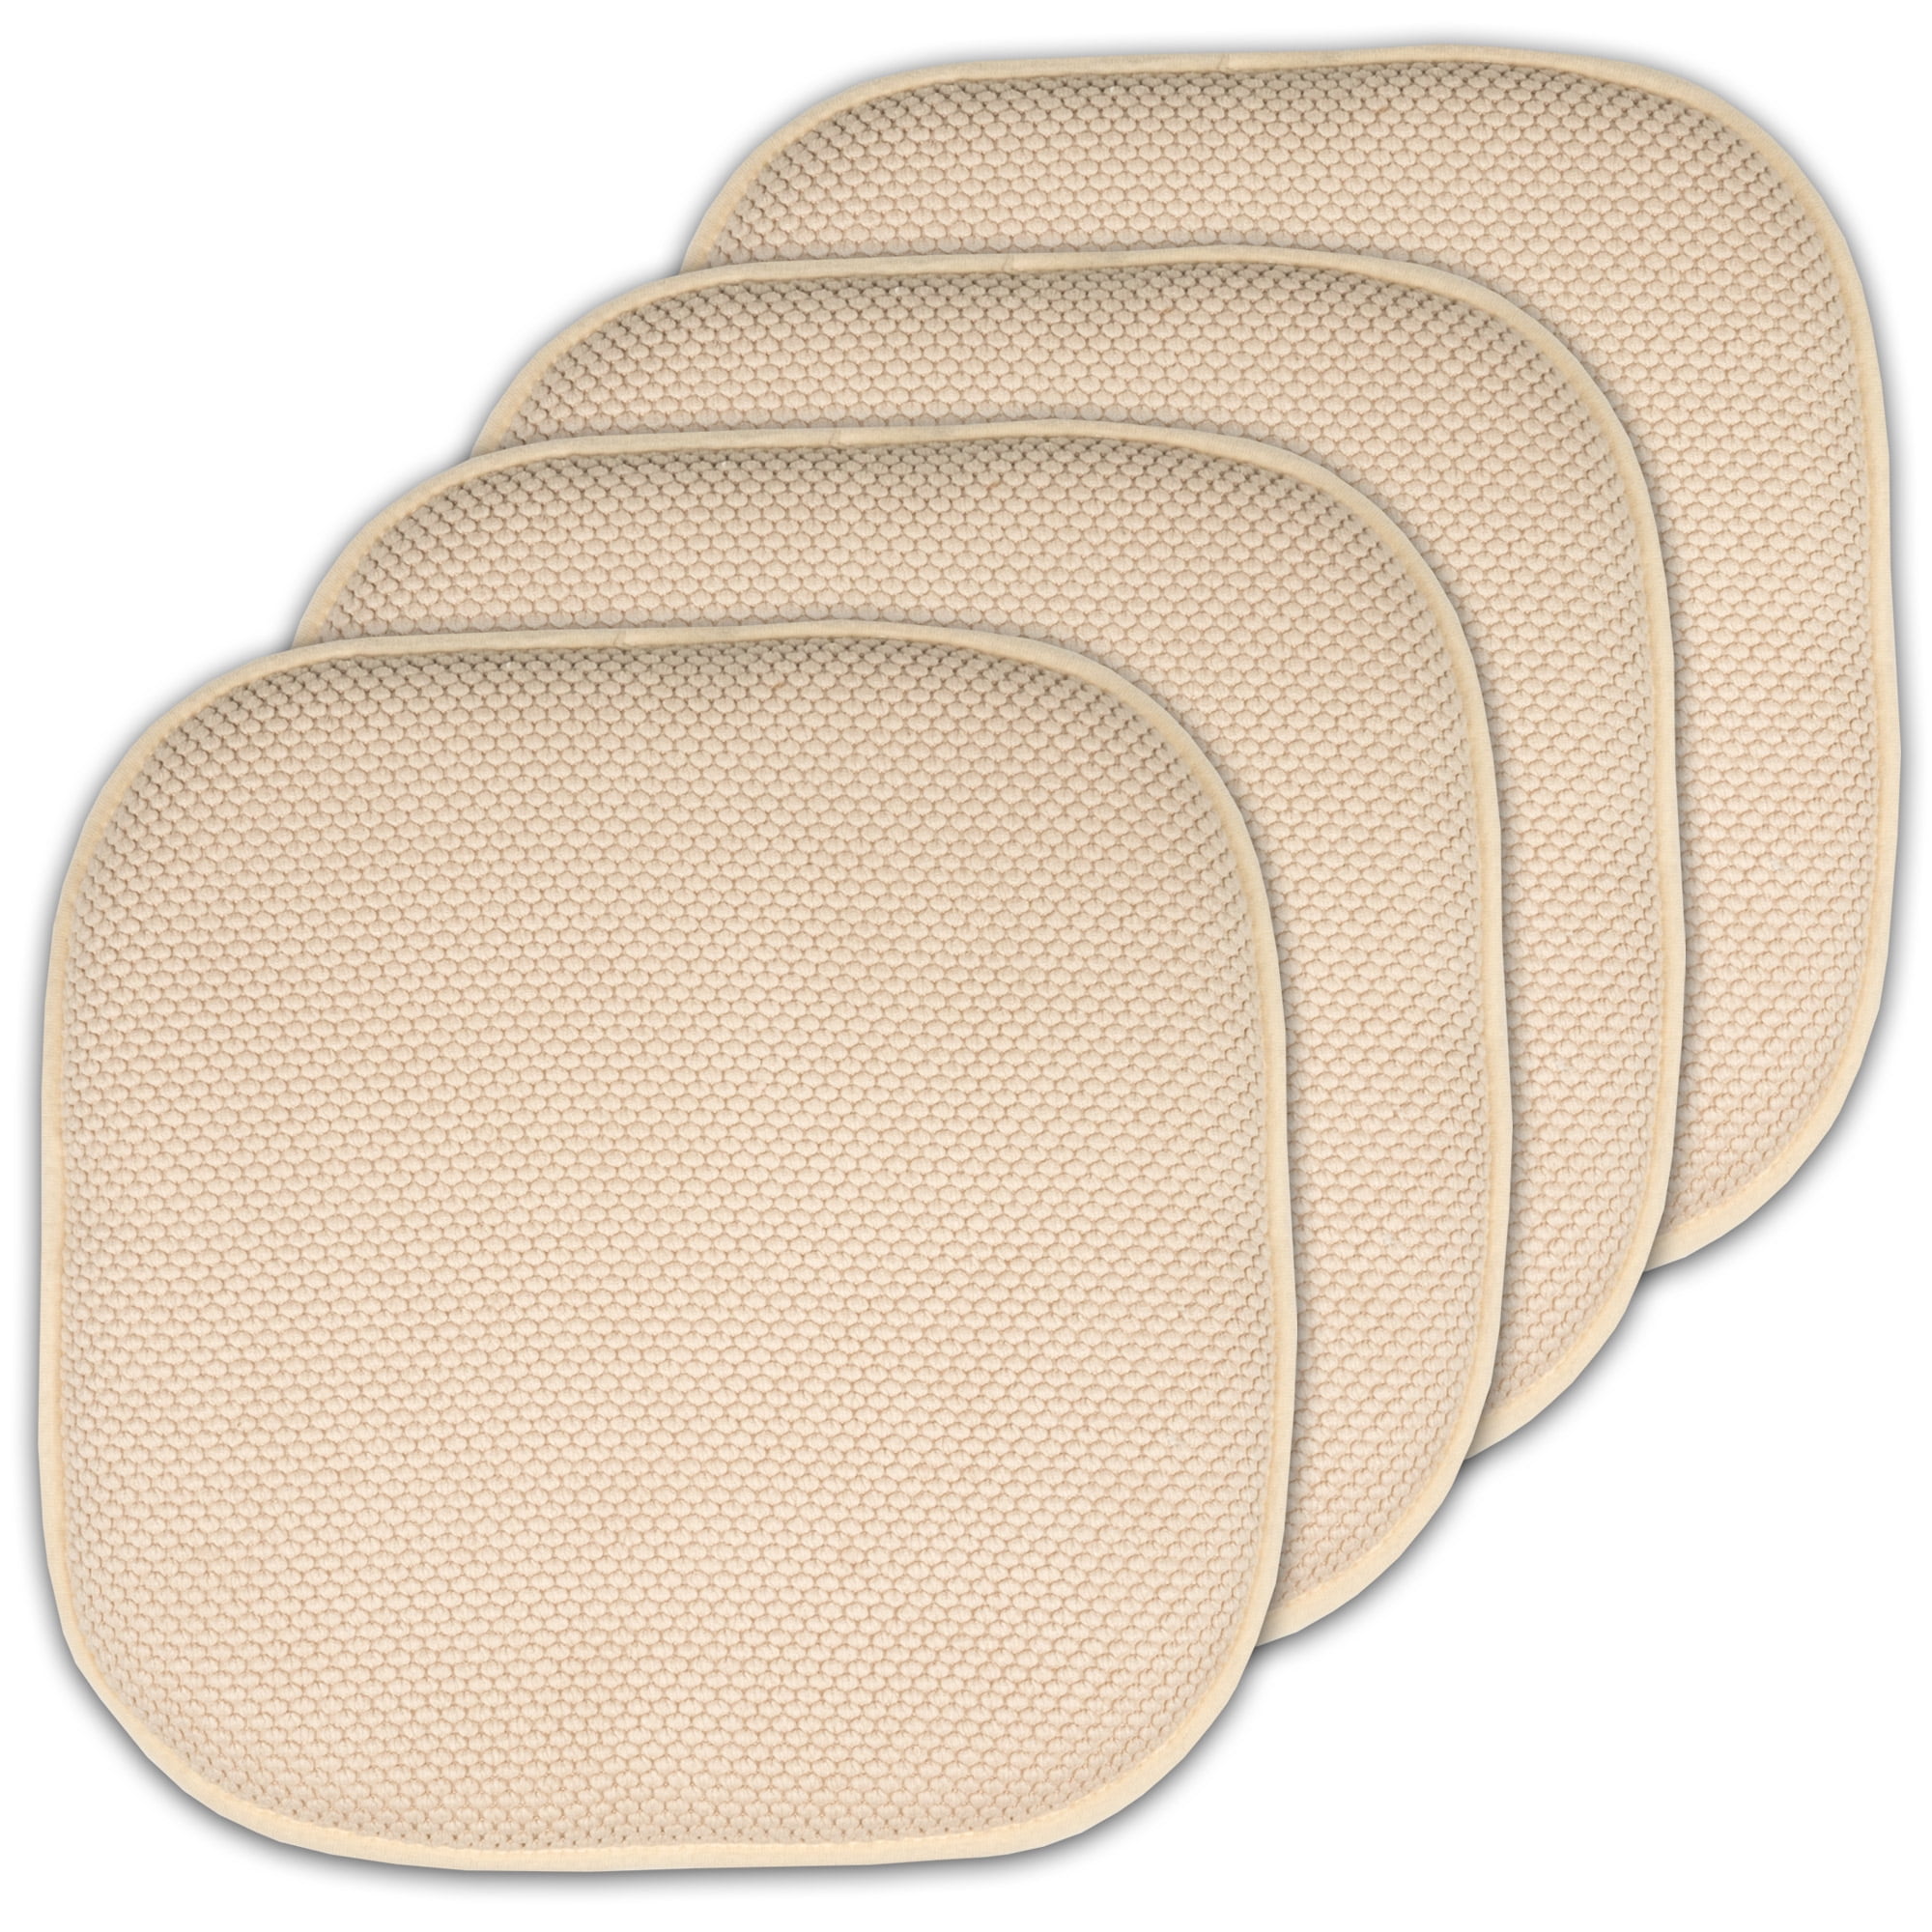 H.VERSAILTEX Premium Chair Cushions Memory Foam Chair Pads 4 Pack 16x16 Inch Thick Soft Seat Cushion Pads Non Slip with SBR Backing and Straps Durable Mats Pads for Lounge Brown Kitchen 